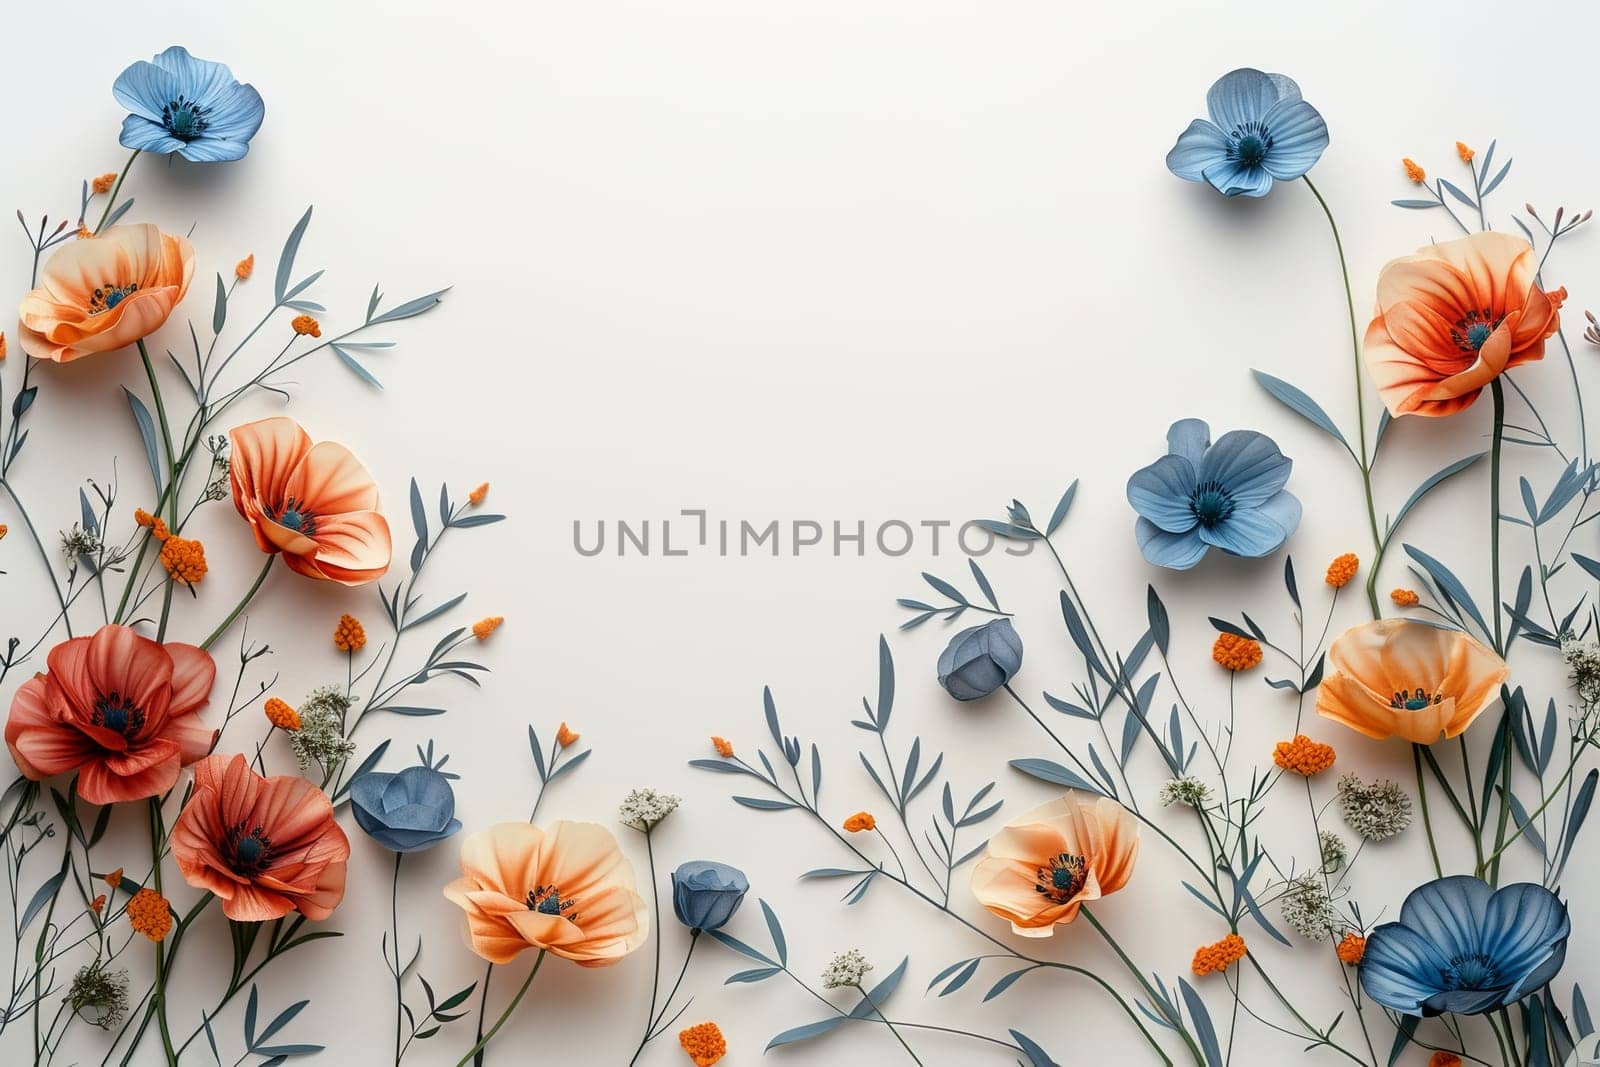 A white frame with a floral border and a large orange flower in the center by itchaznong